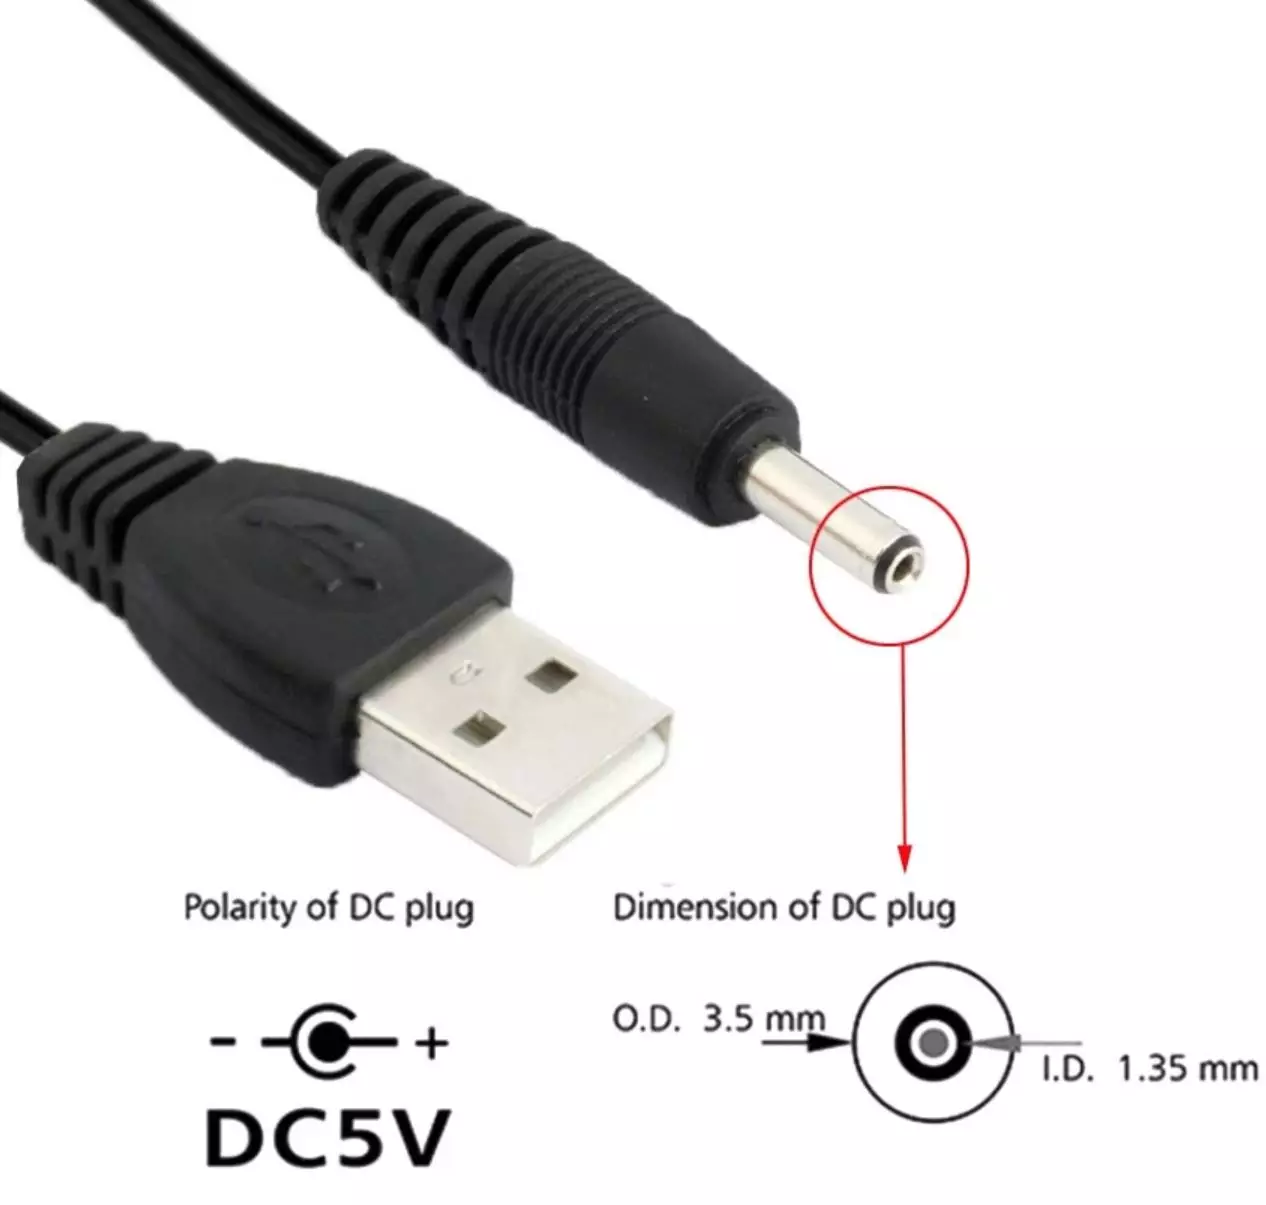 1 Meter 5 volt USB to DC Power Cable